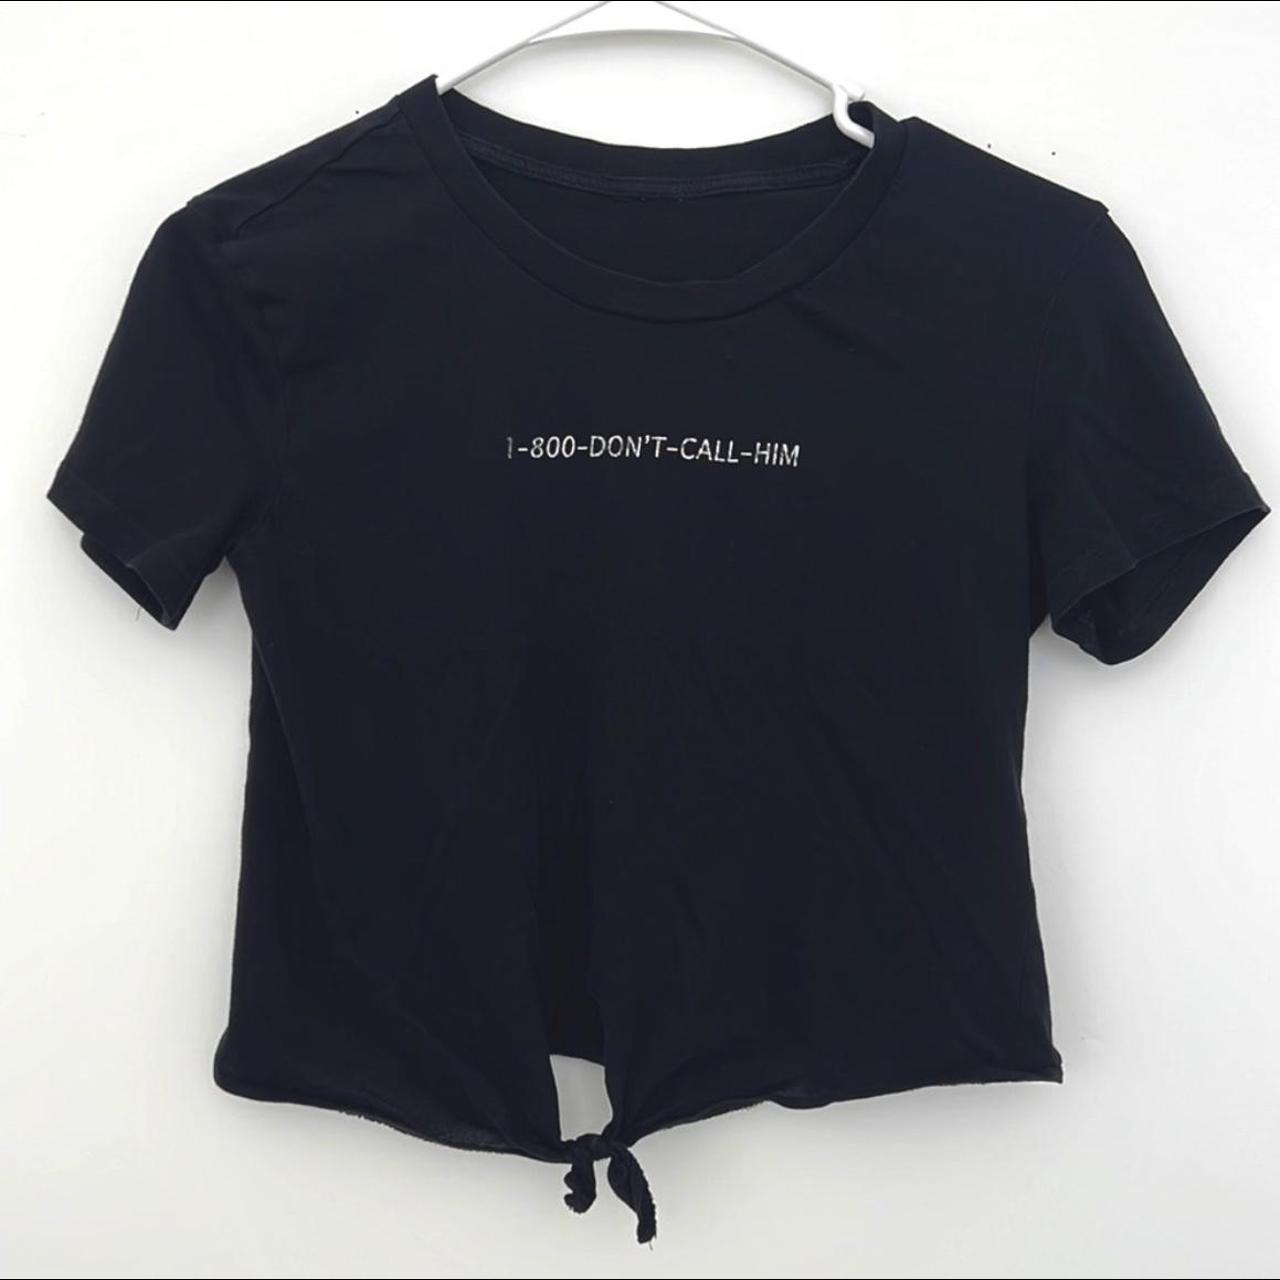 H&M Don’t Call Him Crop Tee Made in India - Depop